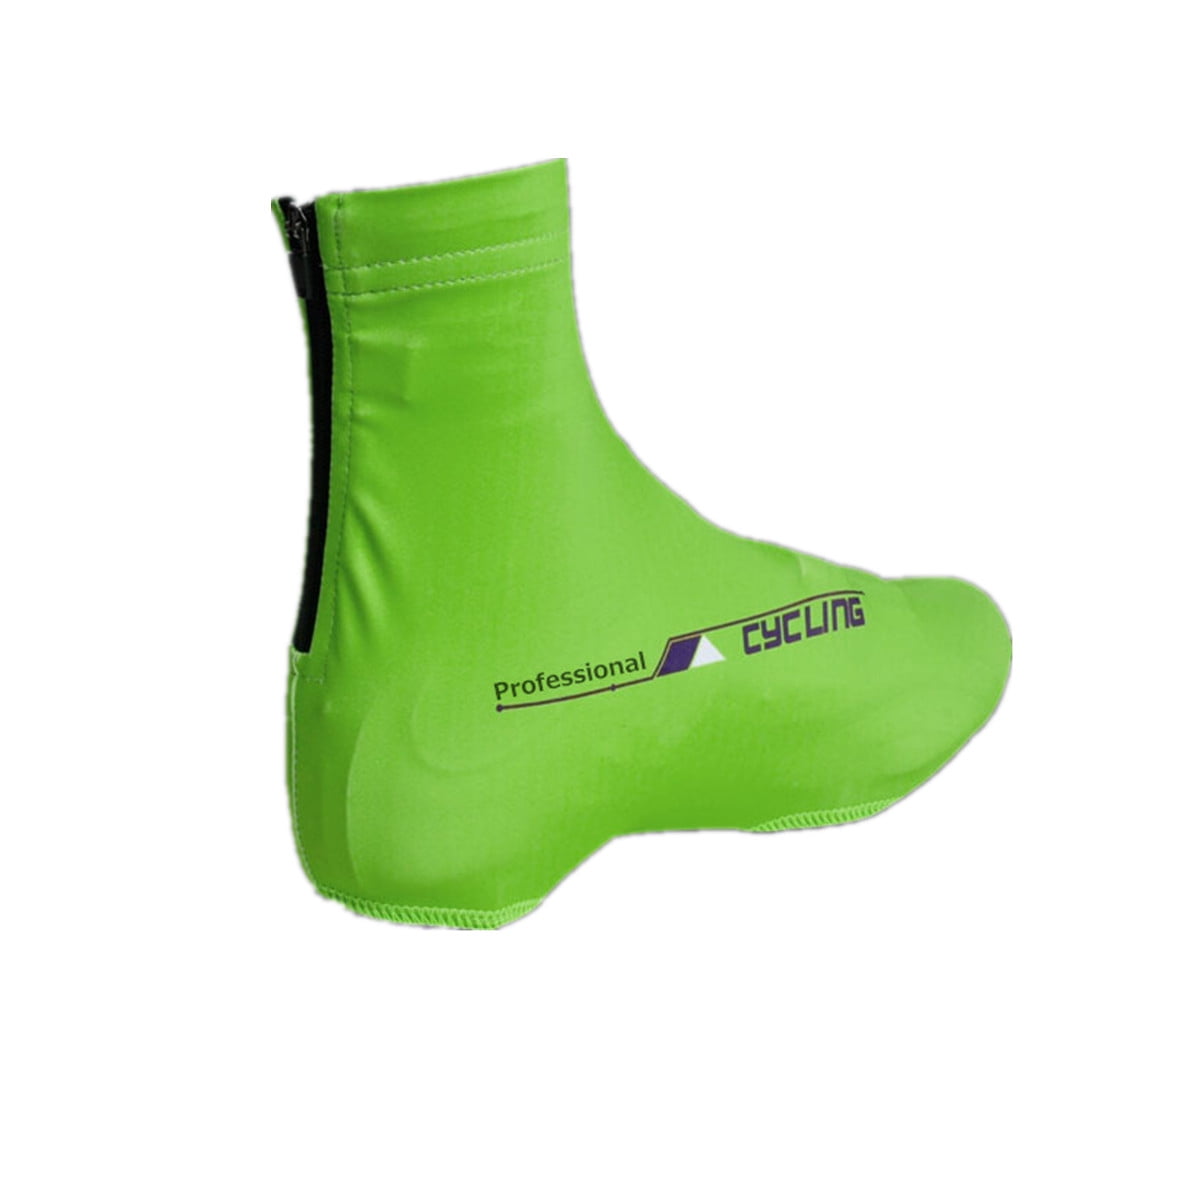 Bicycle Windproof Overshoes Shoe Covers Bike Cycling Zippered Sportwear 3 